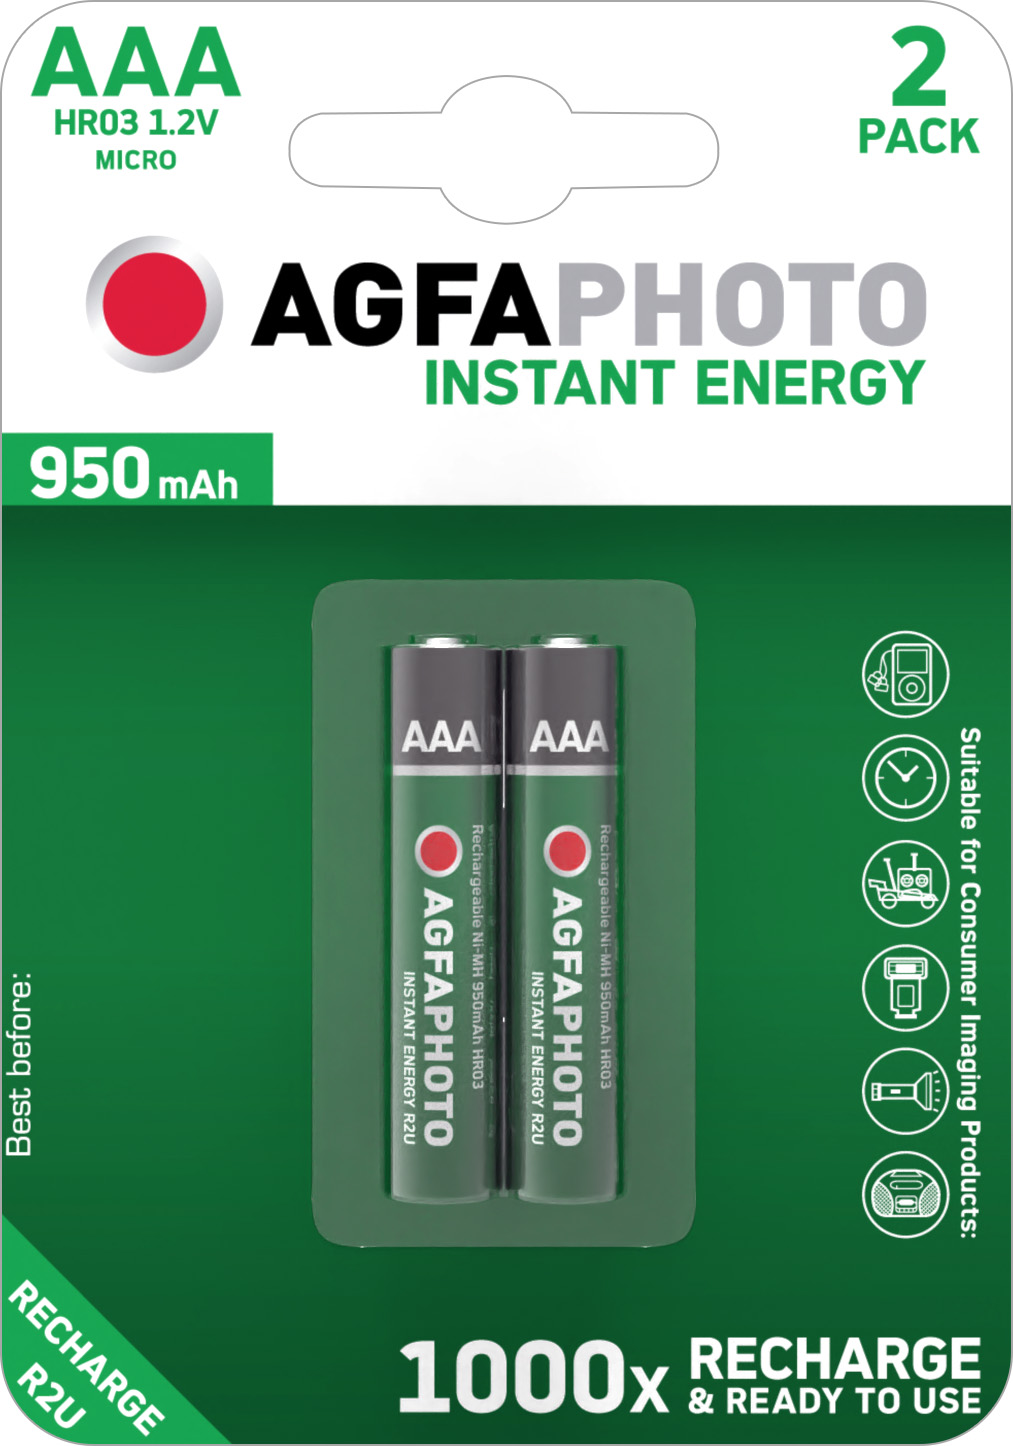 Agfaphoto Akku NiMH, Micro, AAA, HR03, 1.2V/950mAh Instant Energy, Pre-charged, Retail Blister (2-Pack)